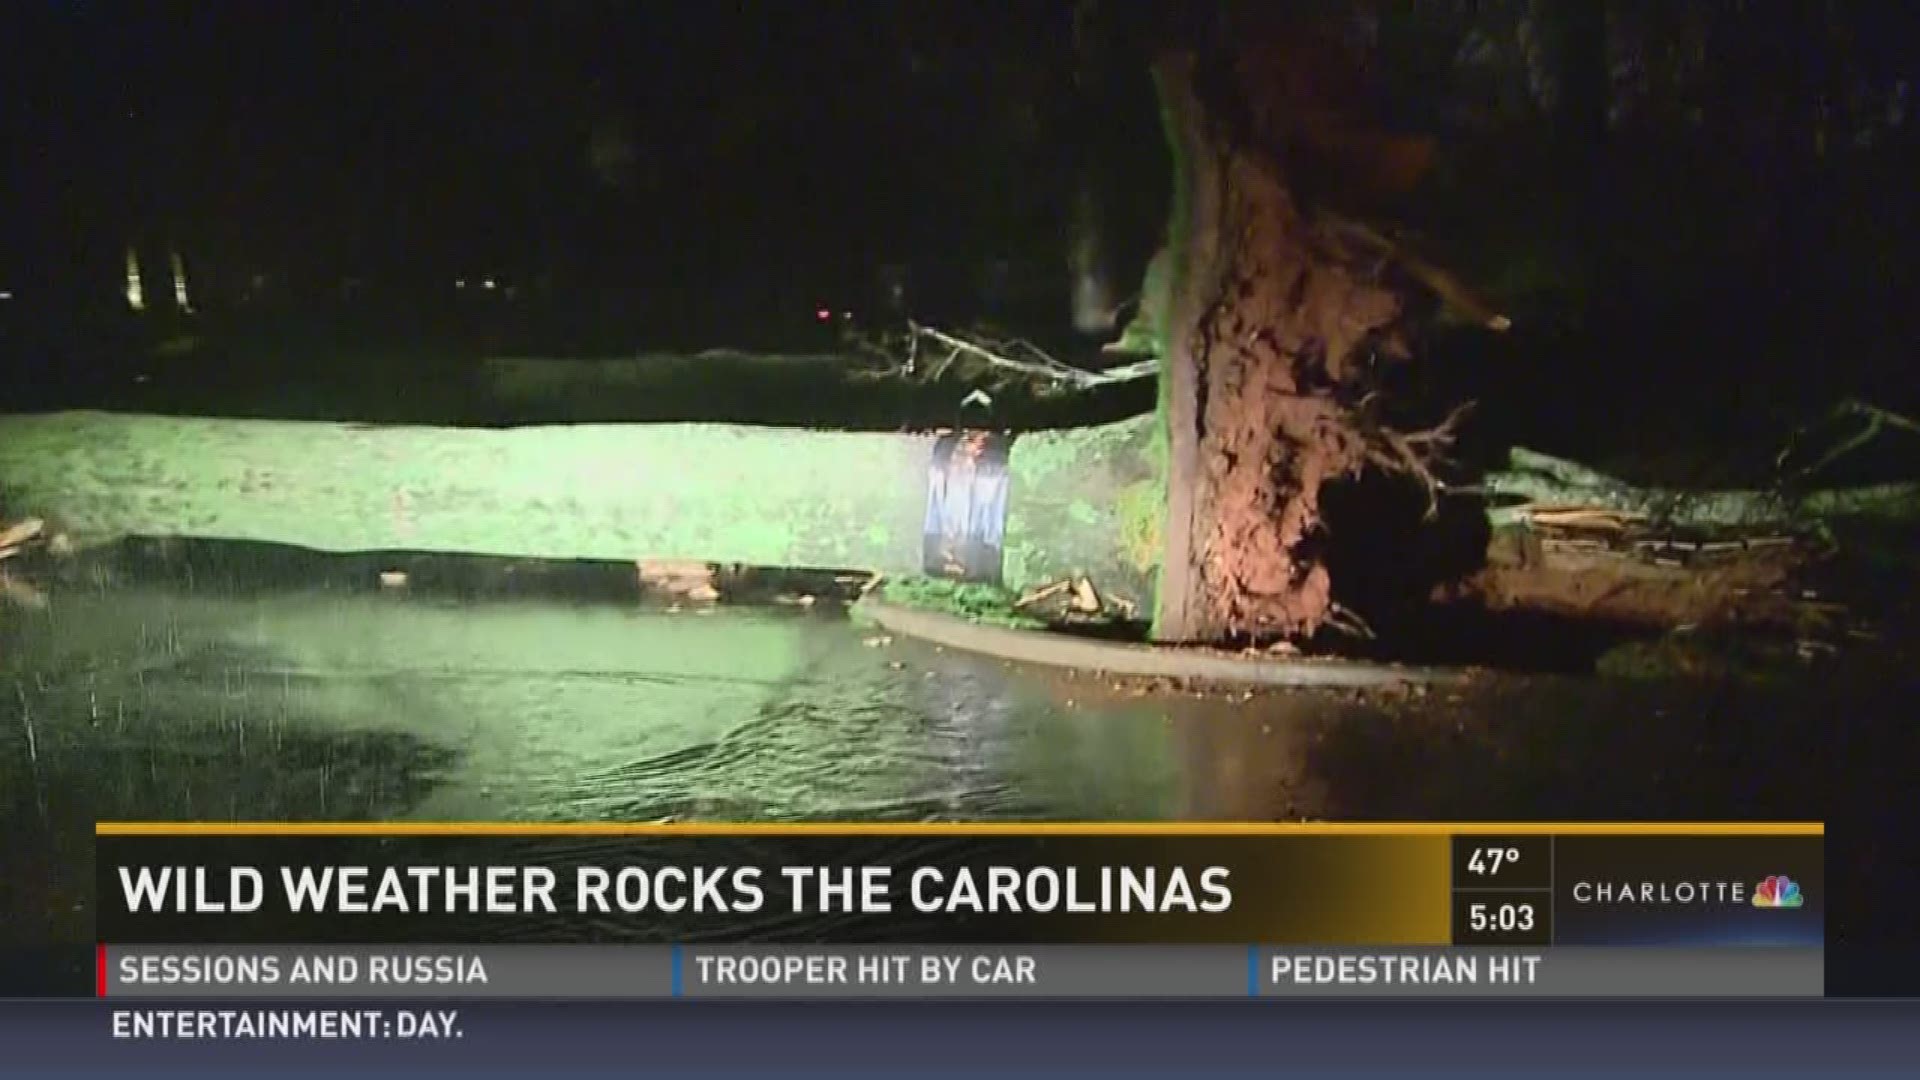 The Charlotte area was rocked by severe weather Wednesday night.